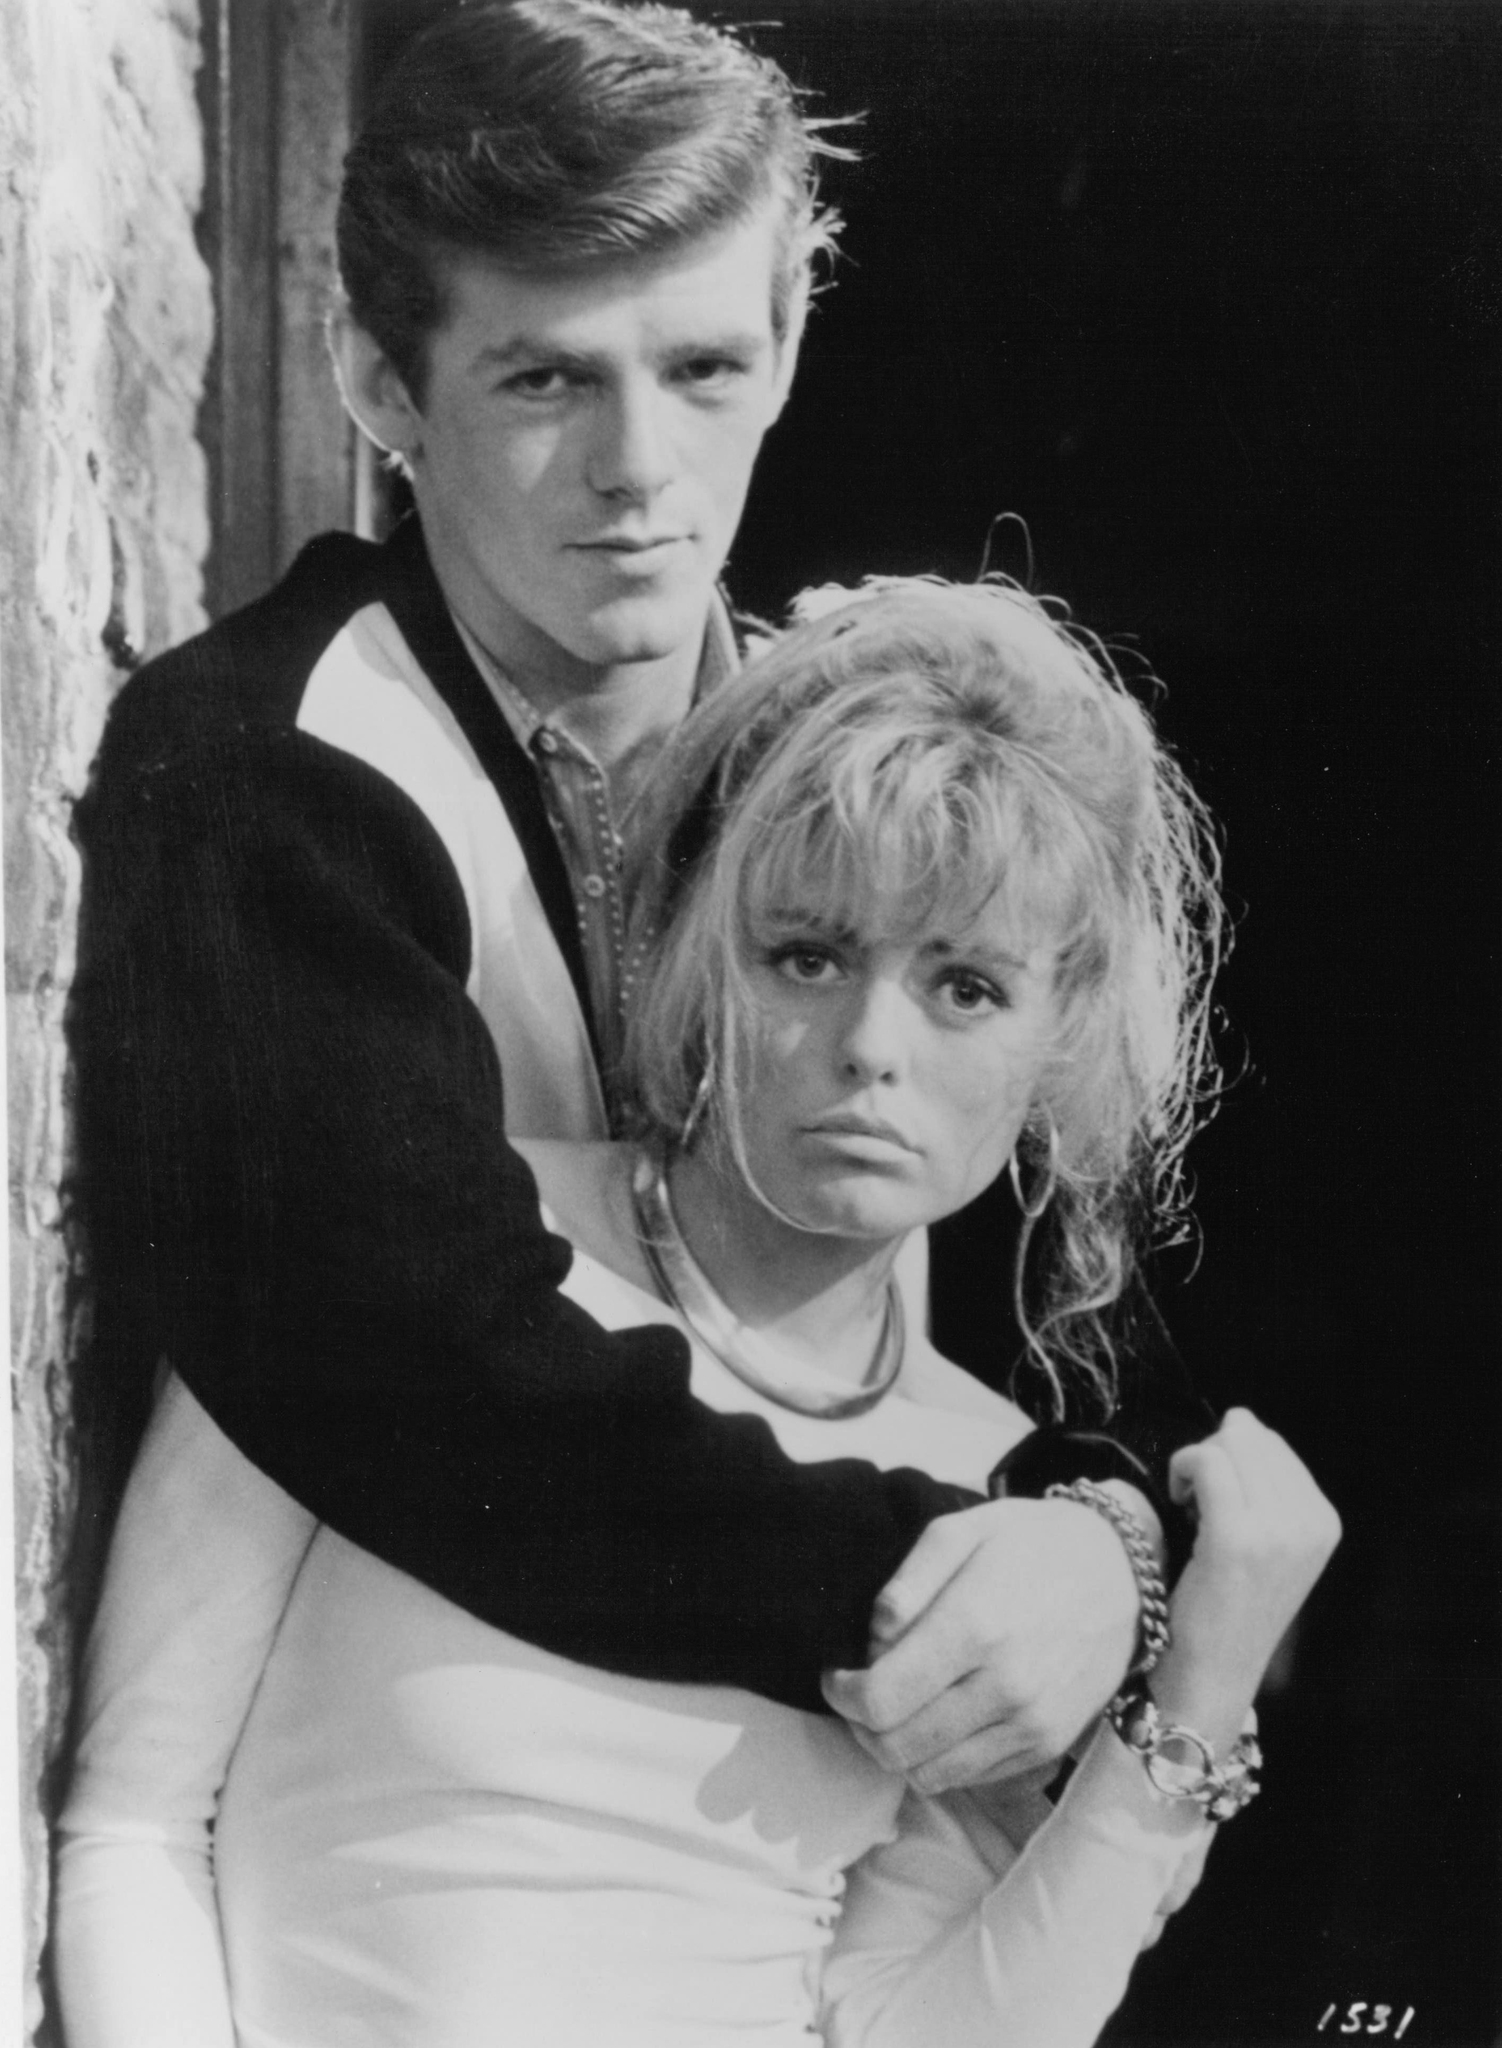 Still of Patsy Kensit and Eddie O'Connell in Absolute Beginners (1986)